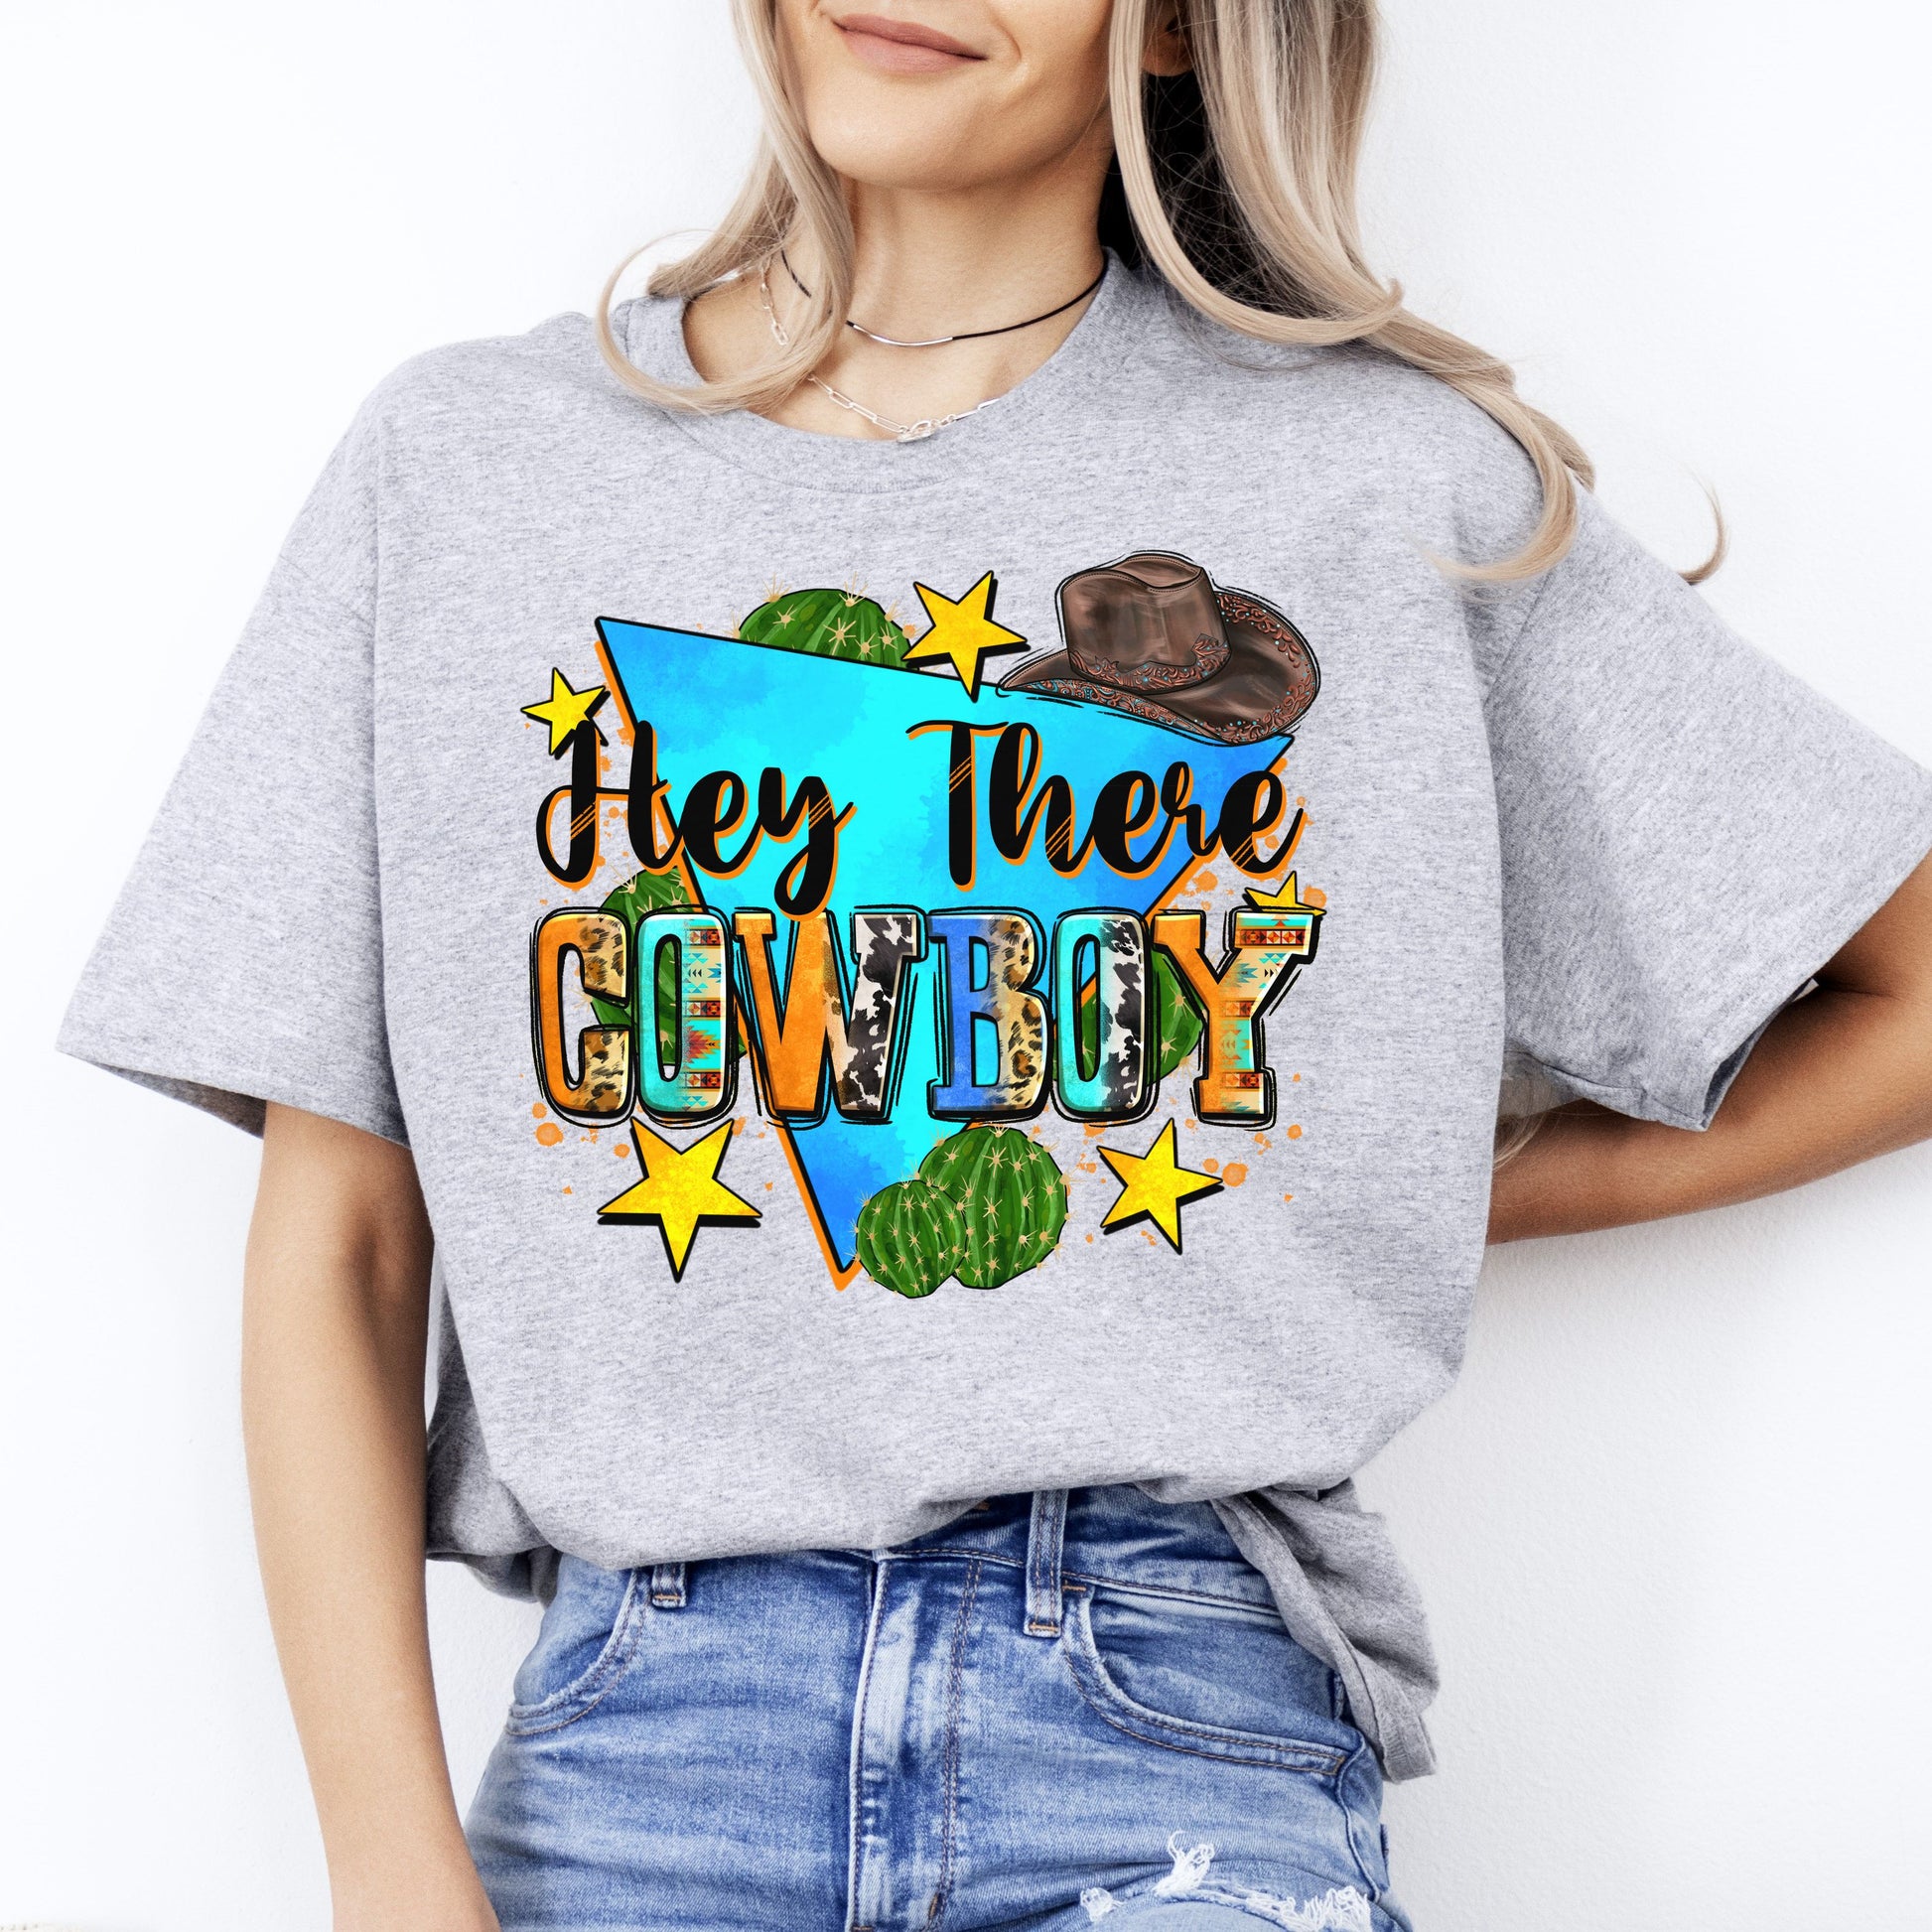 Hey there cowboy T-Shirt gift Western girl Texas cowgirl Unisex tee Sand White Sport Grey-Sport Grey-Family-Gift-Planet